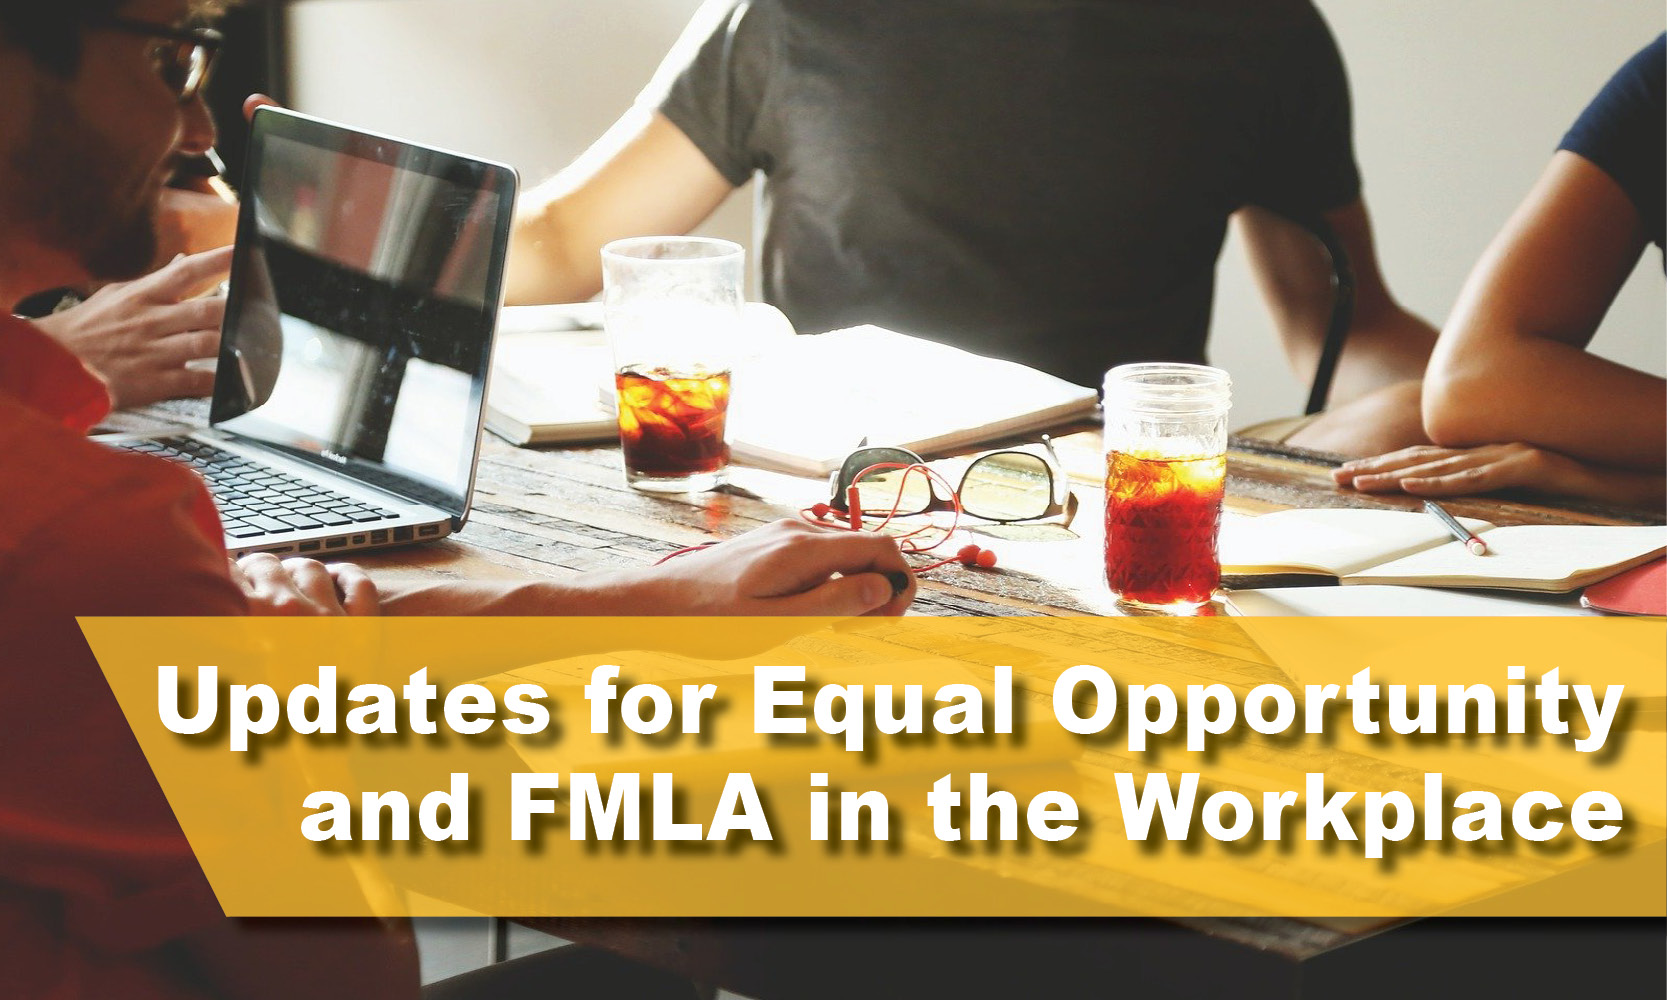 Updates for Equal Opportunity and FMLA in the Workplace